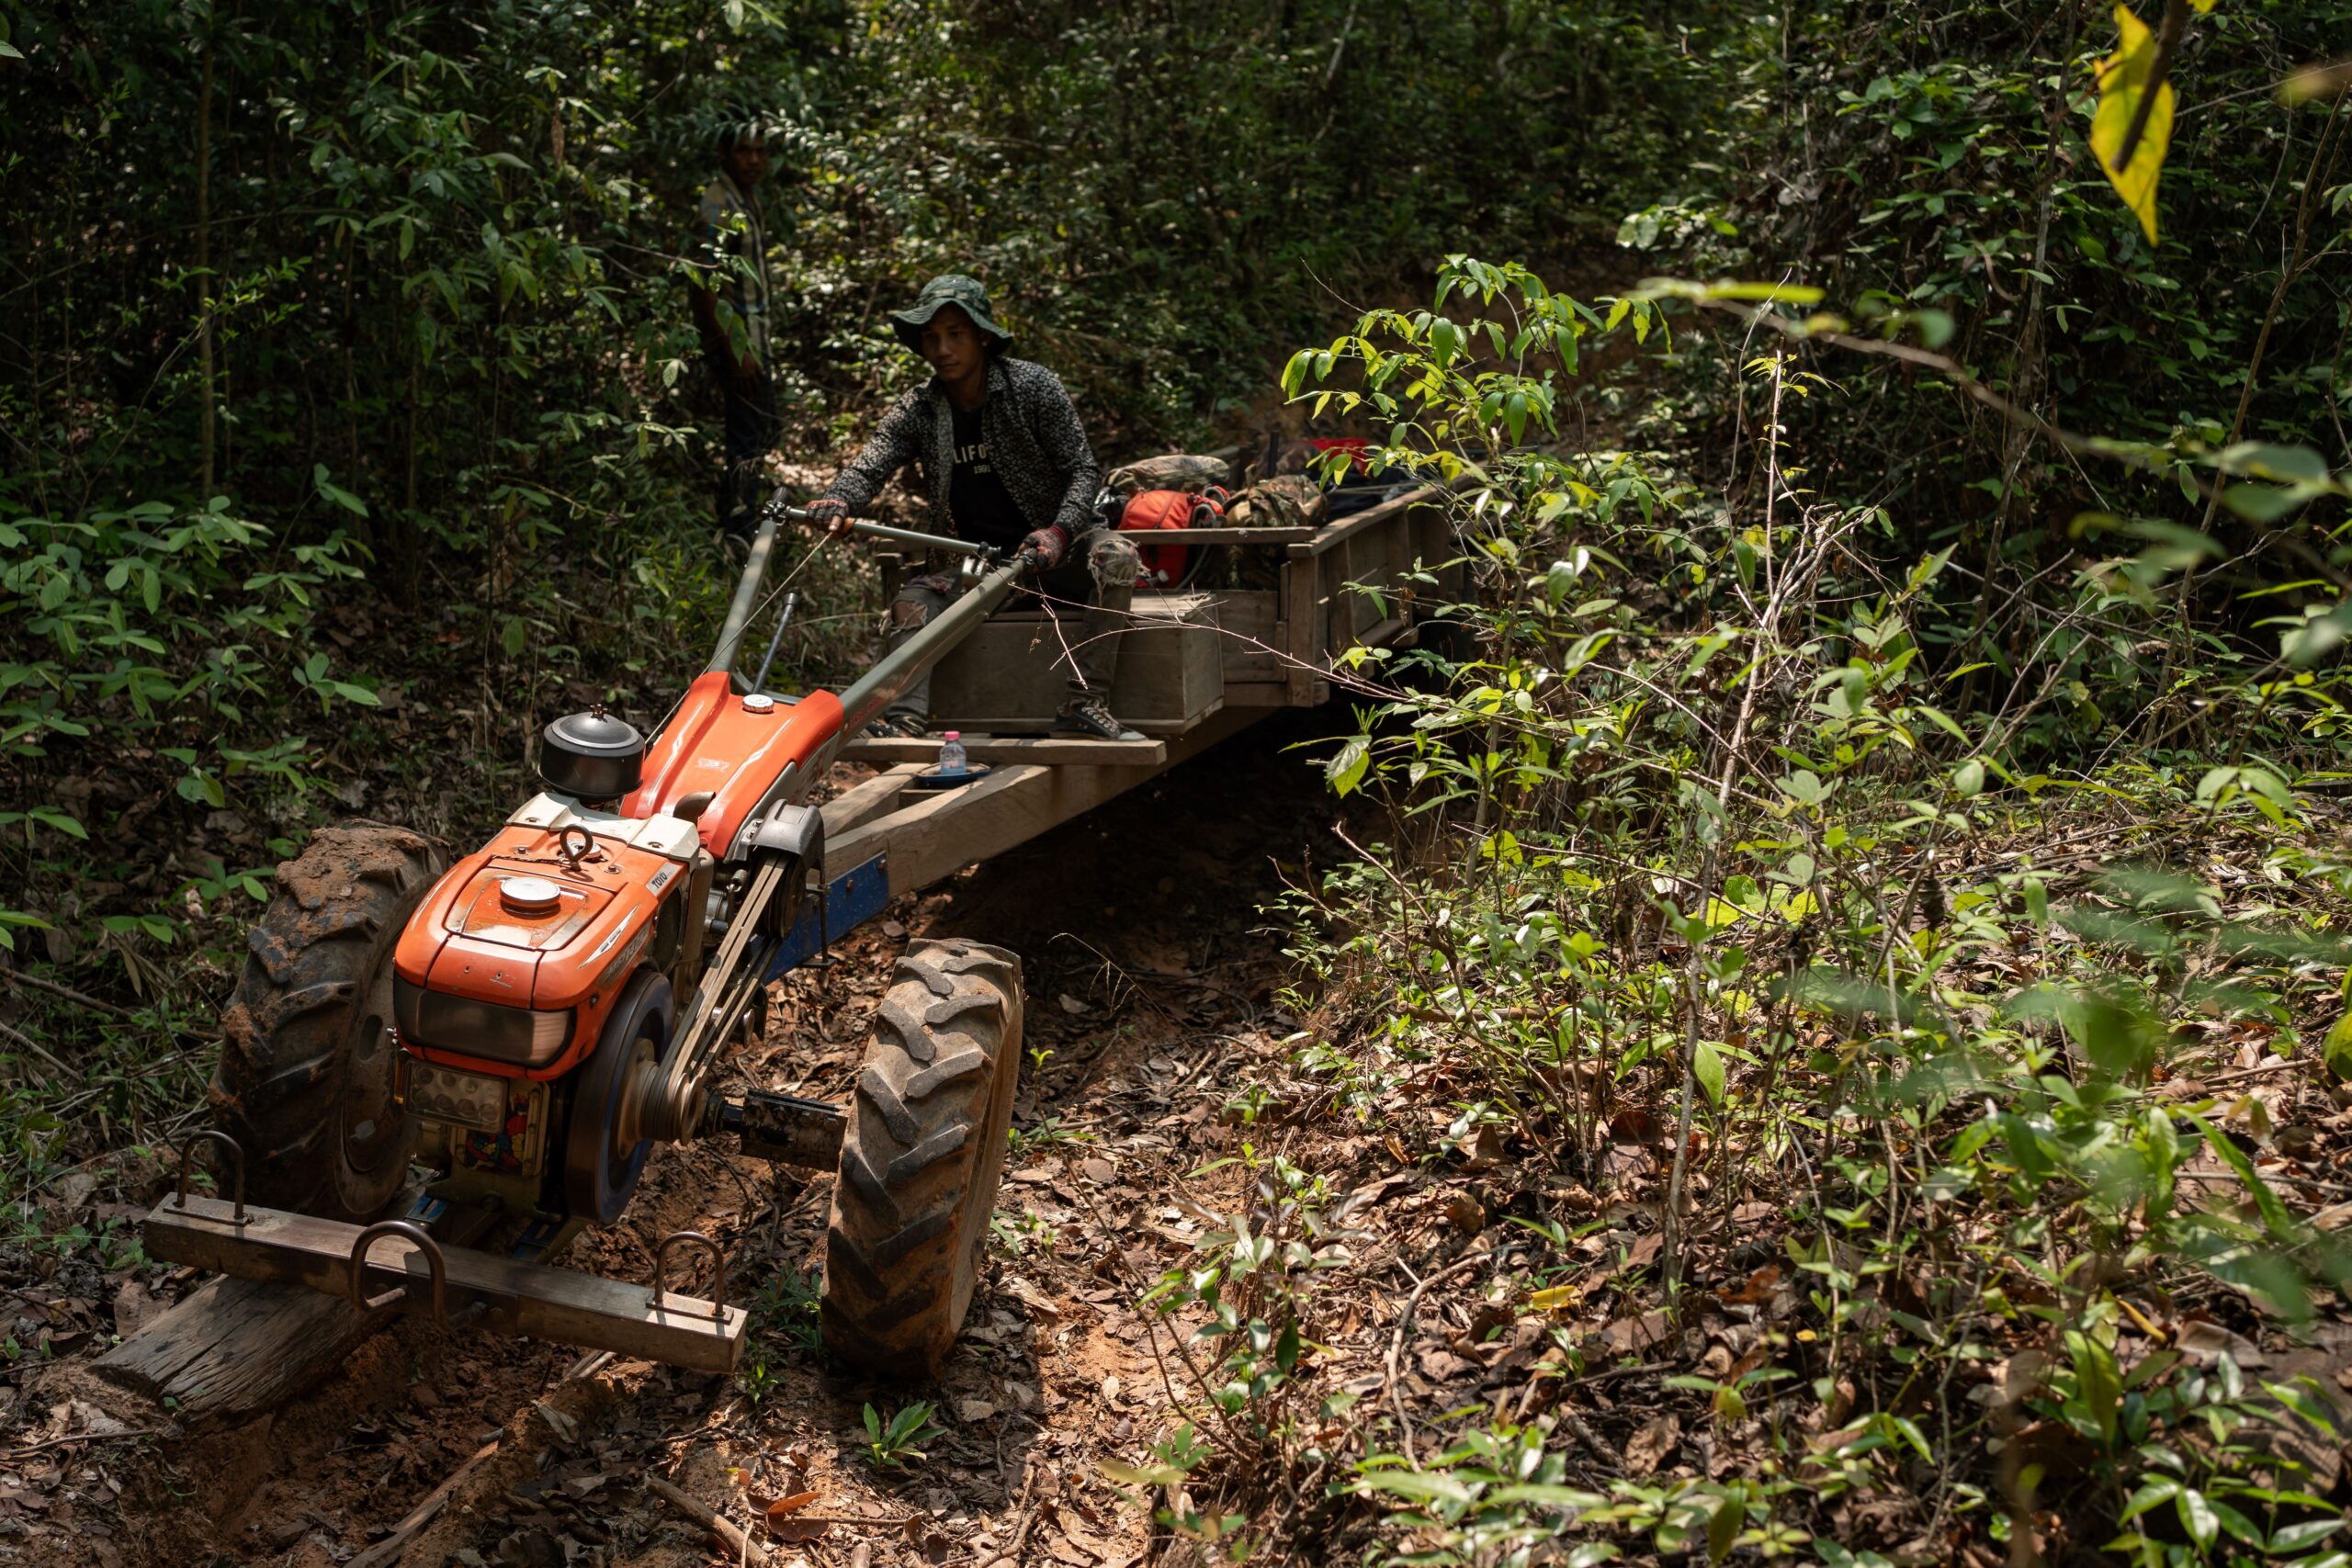 A member of the Prey Preah Roka Community Network leads the patrol convoy, carrying supplies on a koy-yun through Preah Vihear province, where ELCs have decimated the forest. Image by Andy Ball / Mongabay.